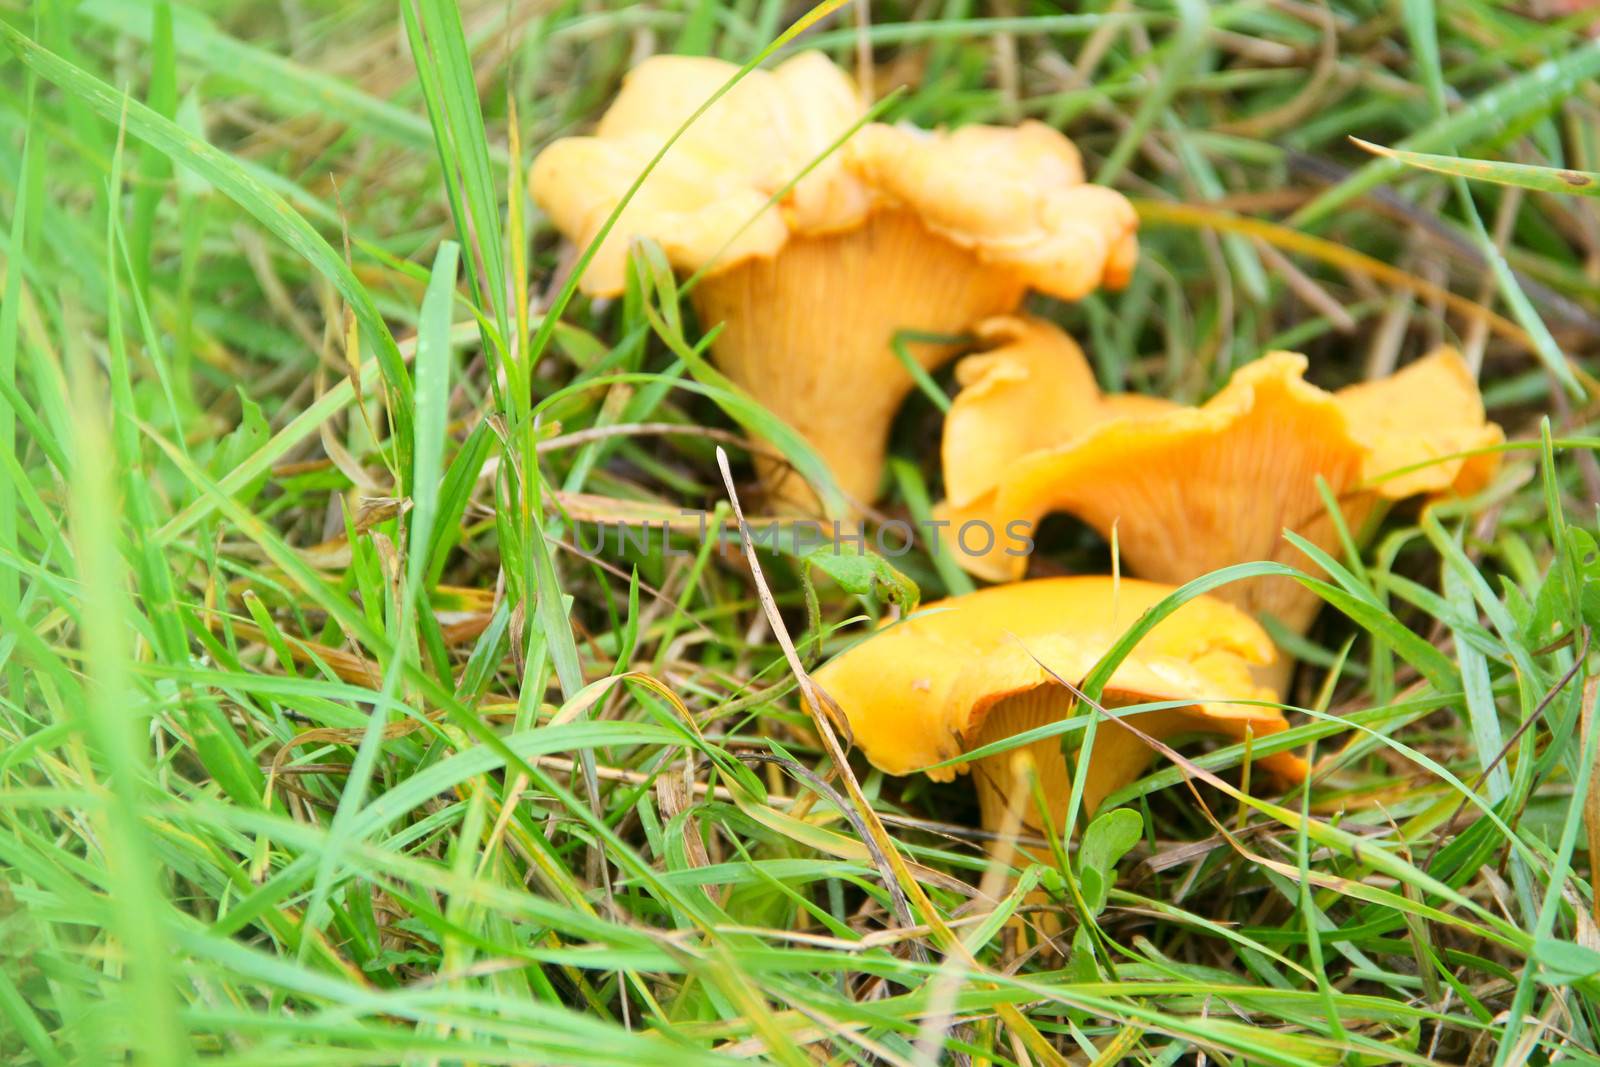 Chanterelle mushrooms growing in the grass macro close-up